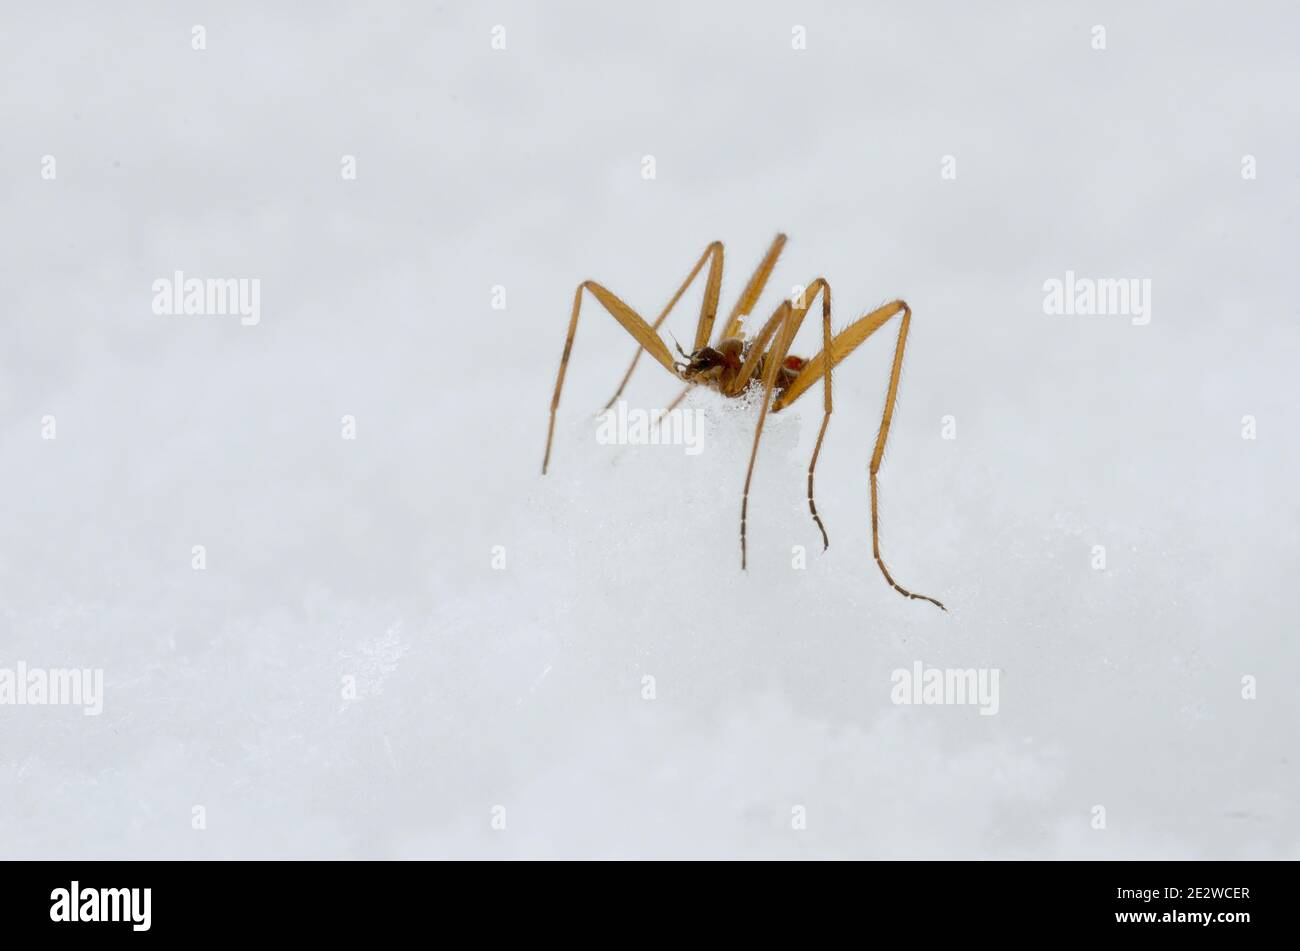 Chionea lutescens, diptera, insect on snow, Stock Photo